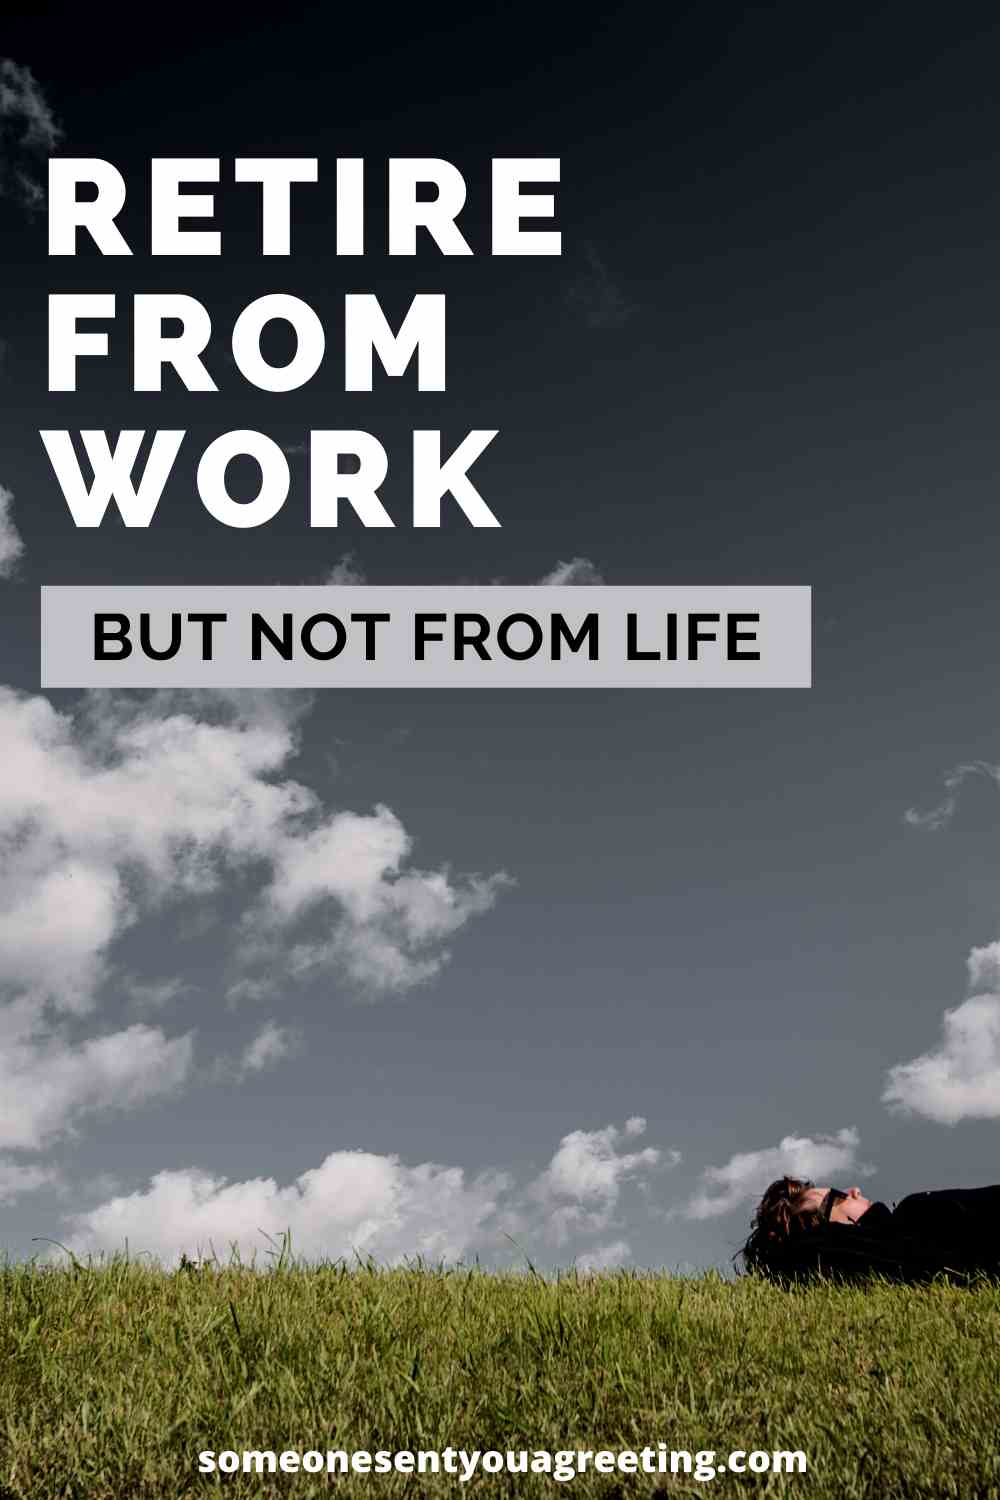 Retire from work not from life quote